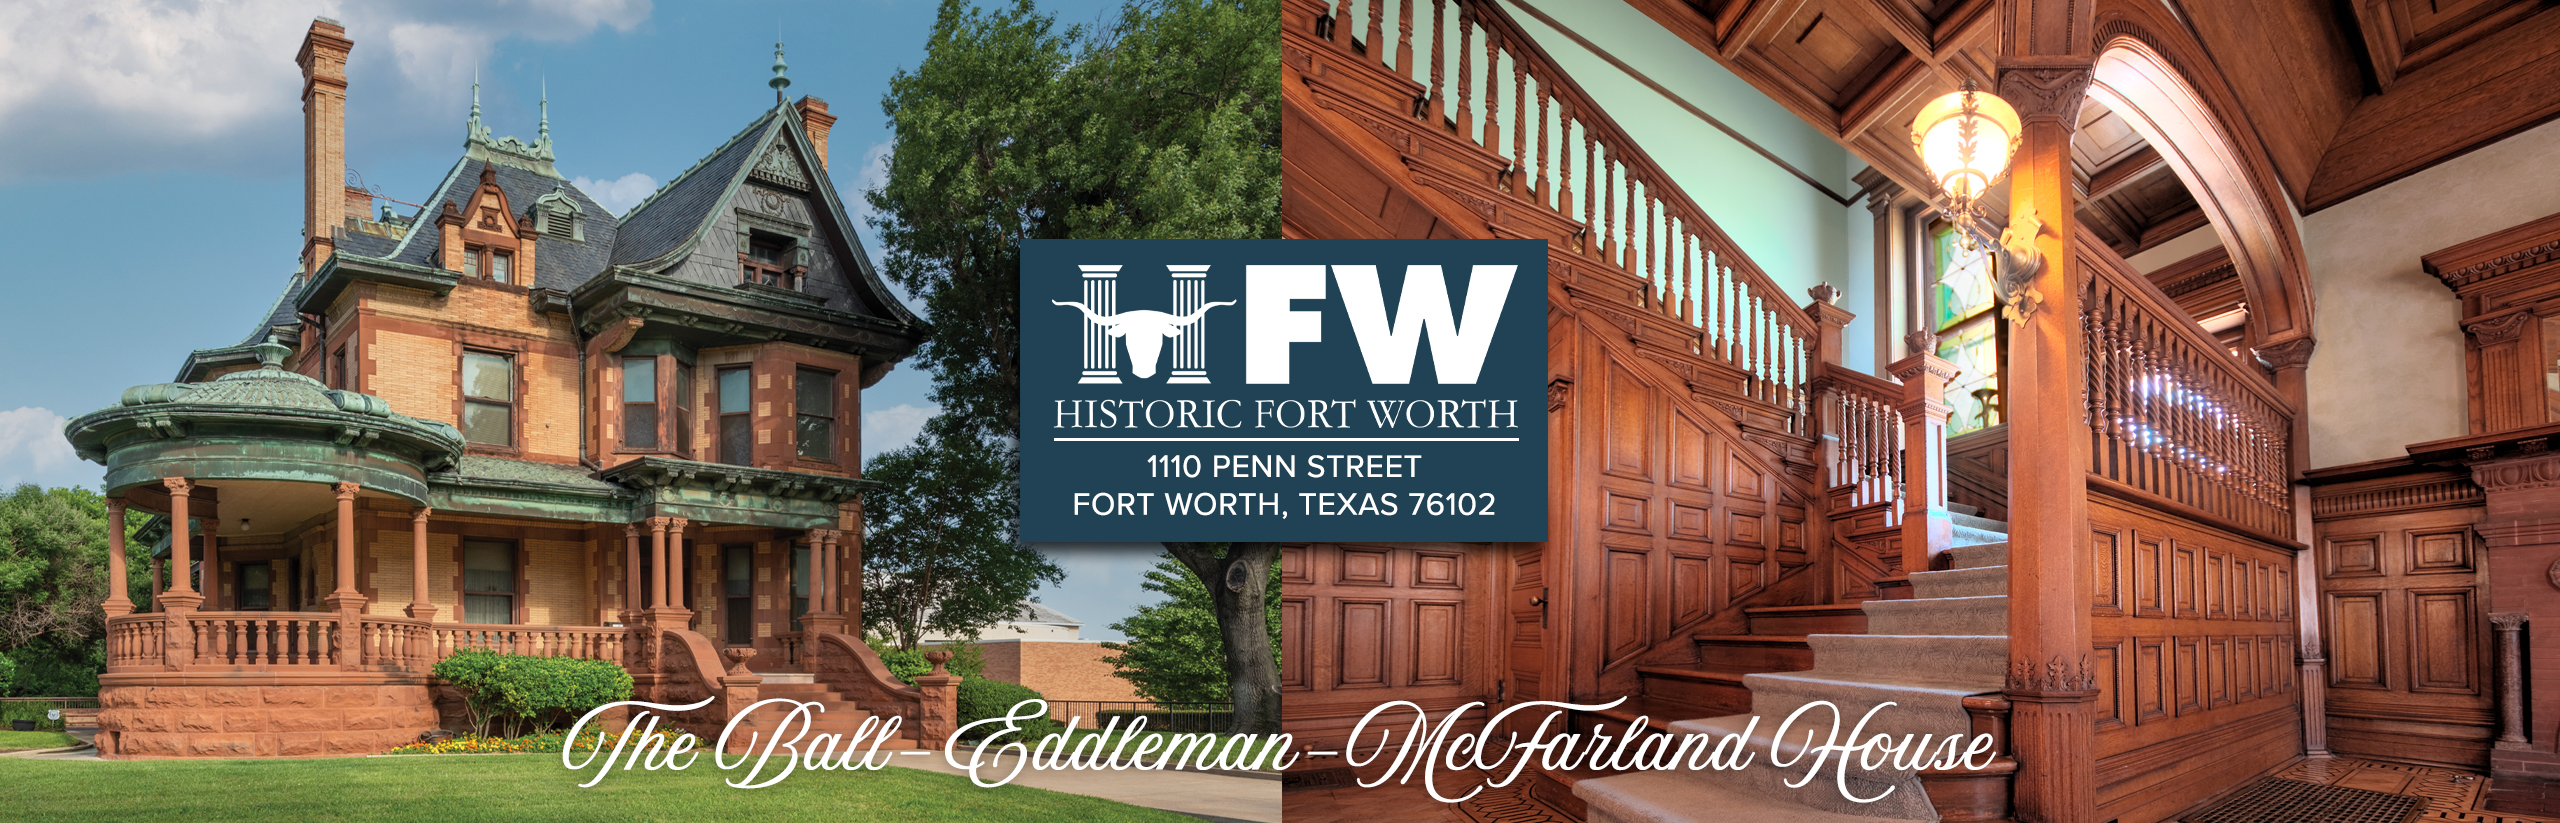 historic home tours fort worth